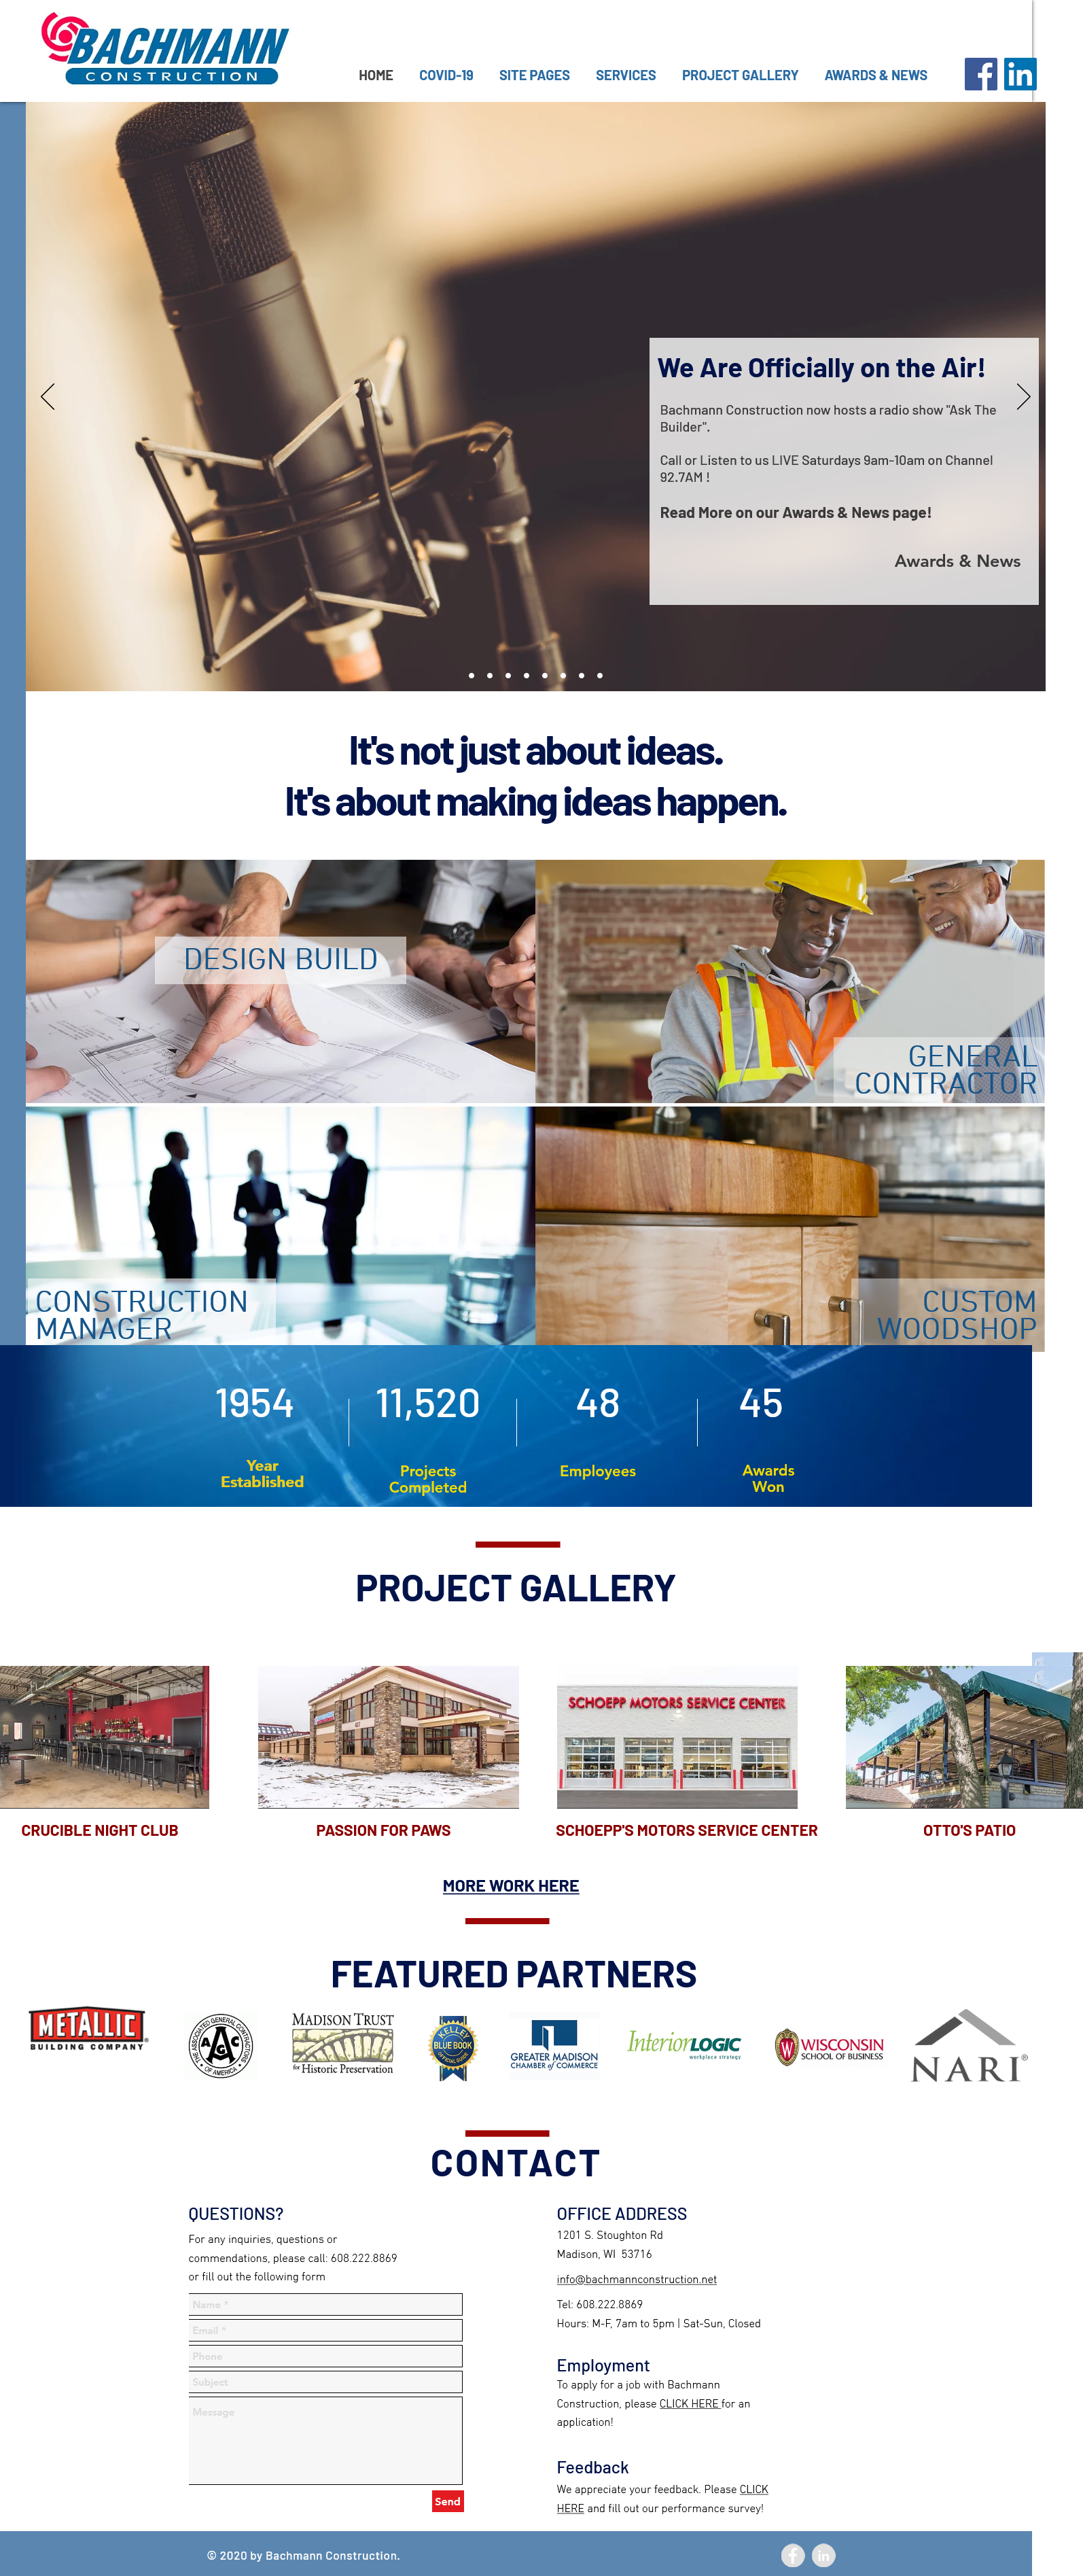 Image of a construction website for Bachmann Construction in Madison, WI.